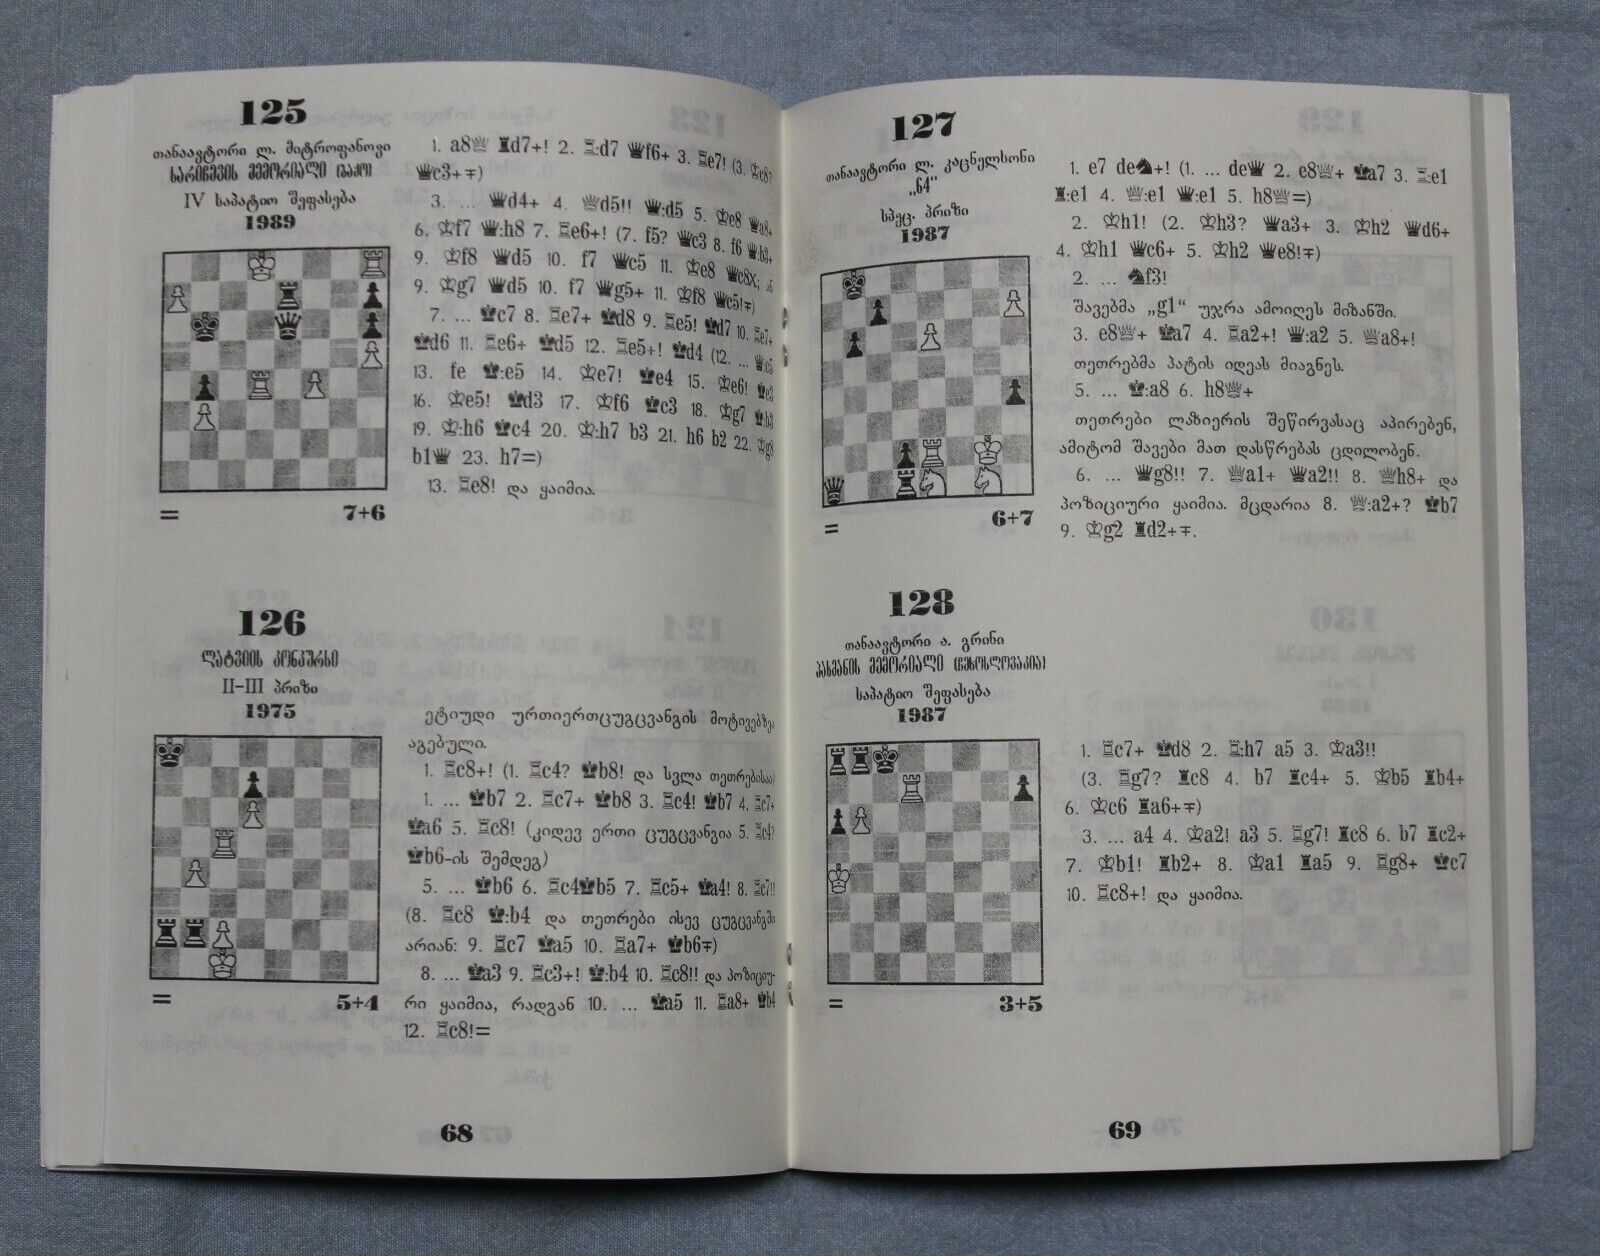 11104.Chess Book: Problems&Studies, Simplicity, Sophistication&Beauty, 50 copies, 1999